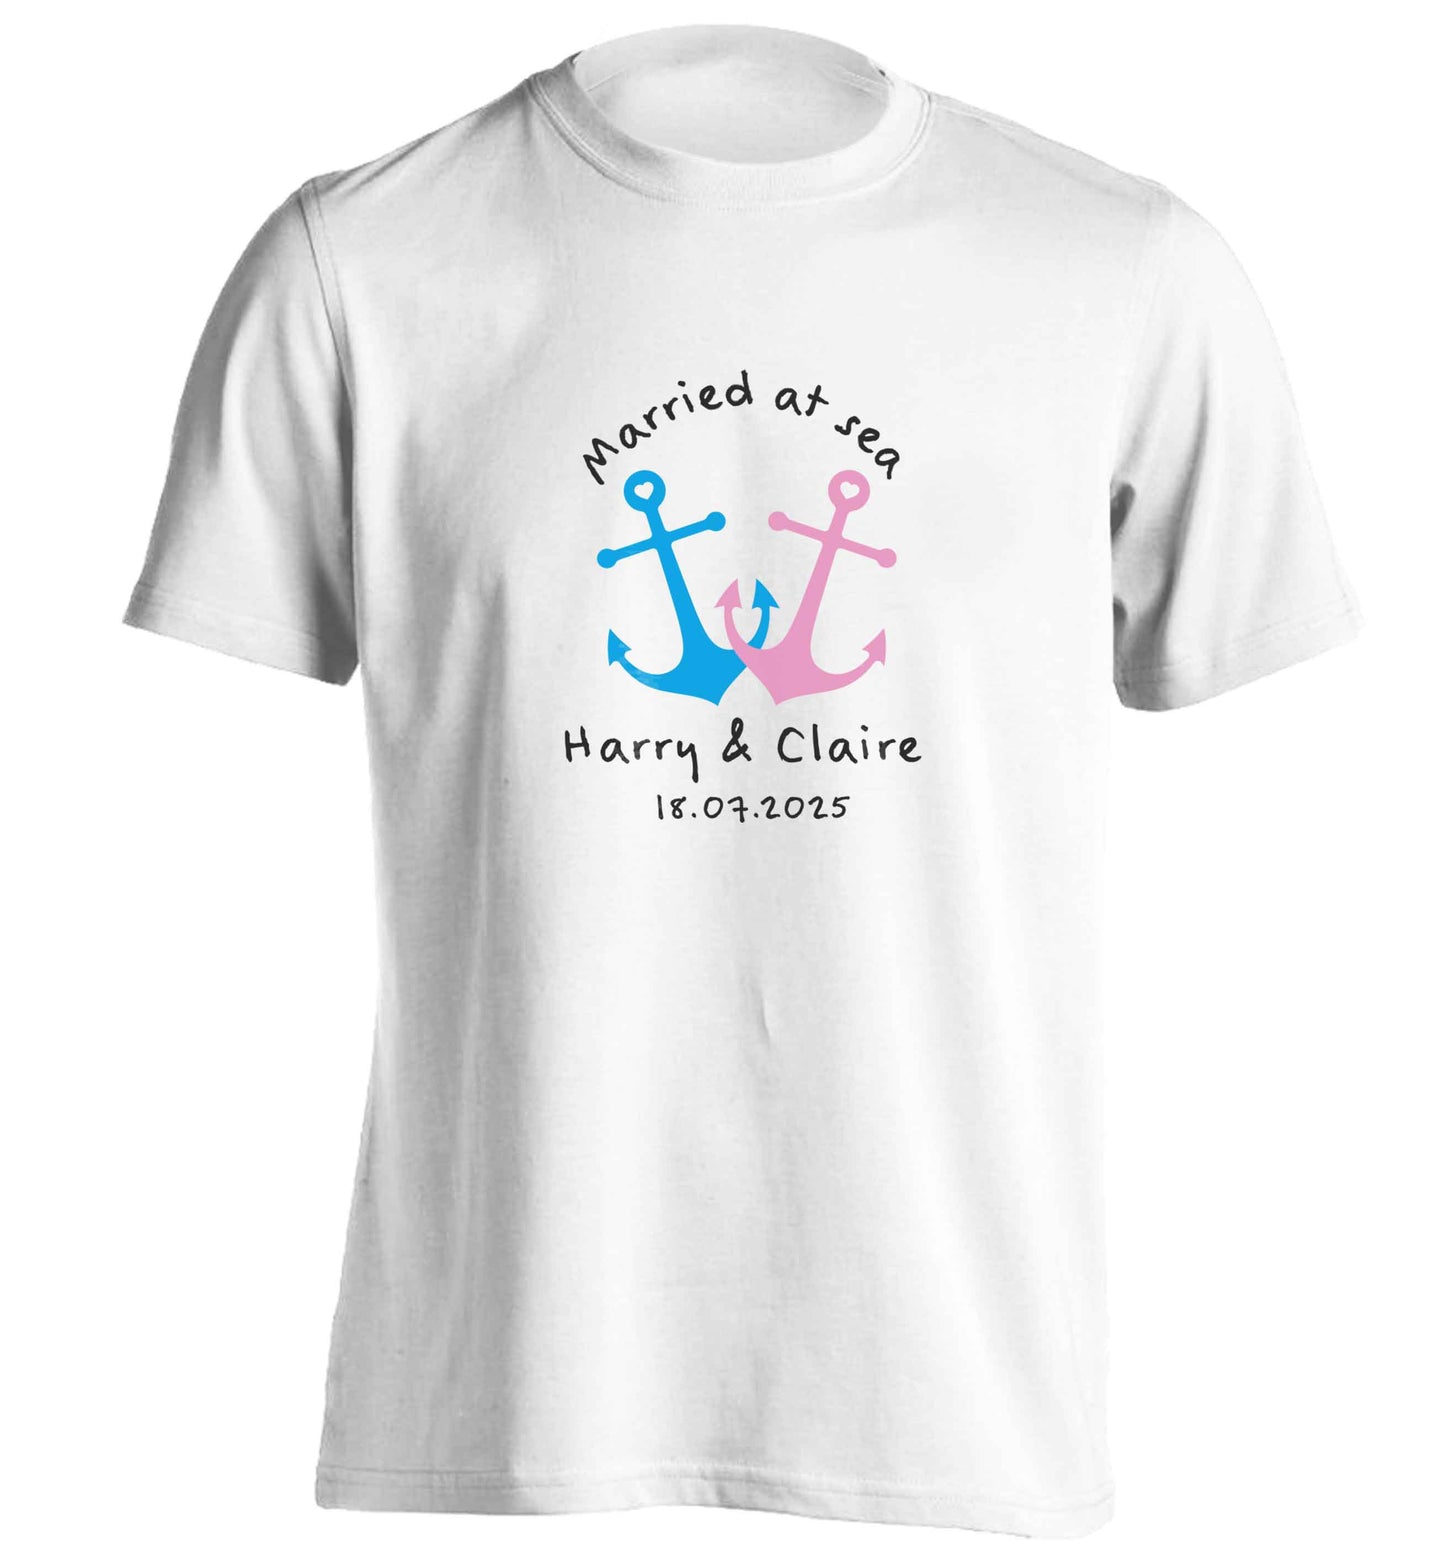 Married at sea adults unisex white Tshirt 2XL